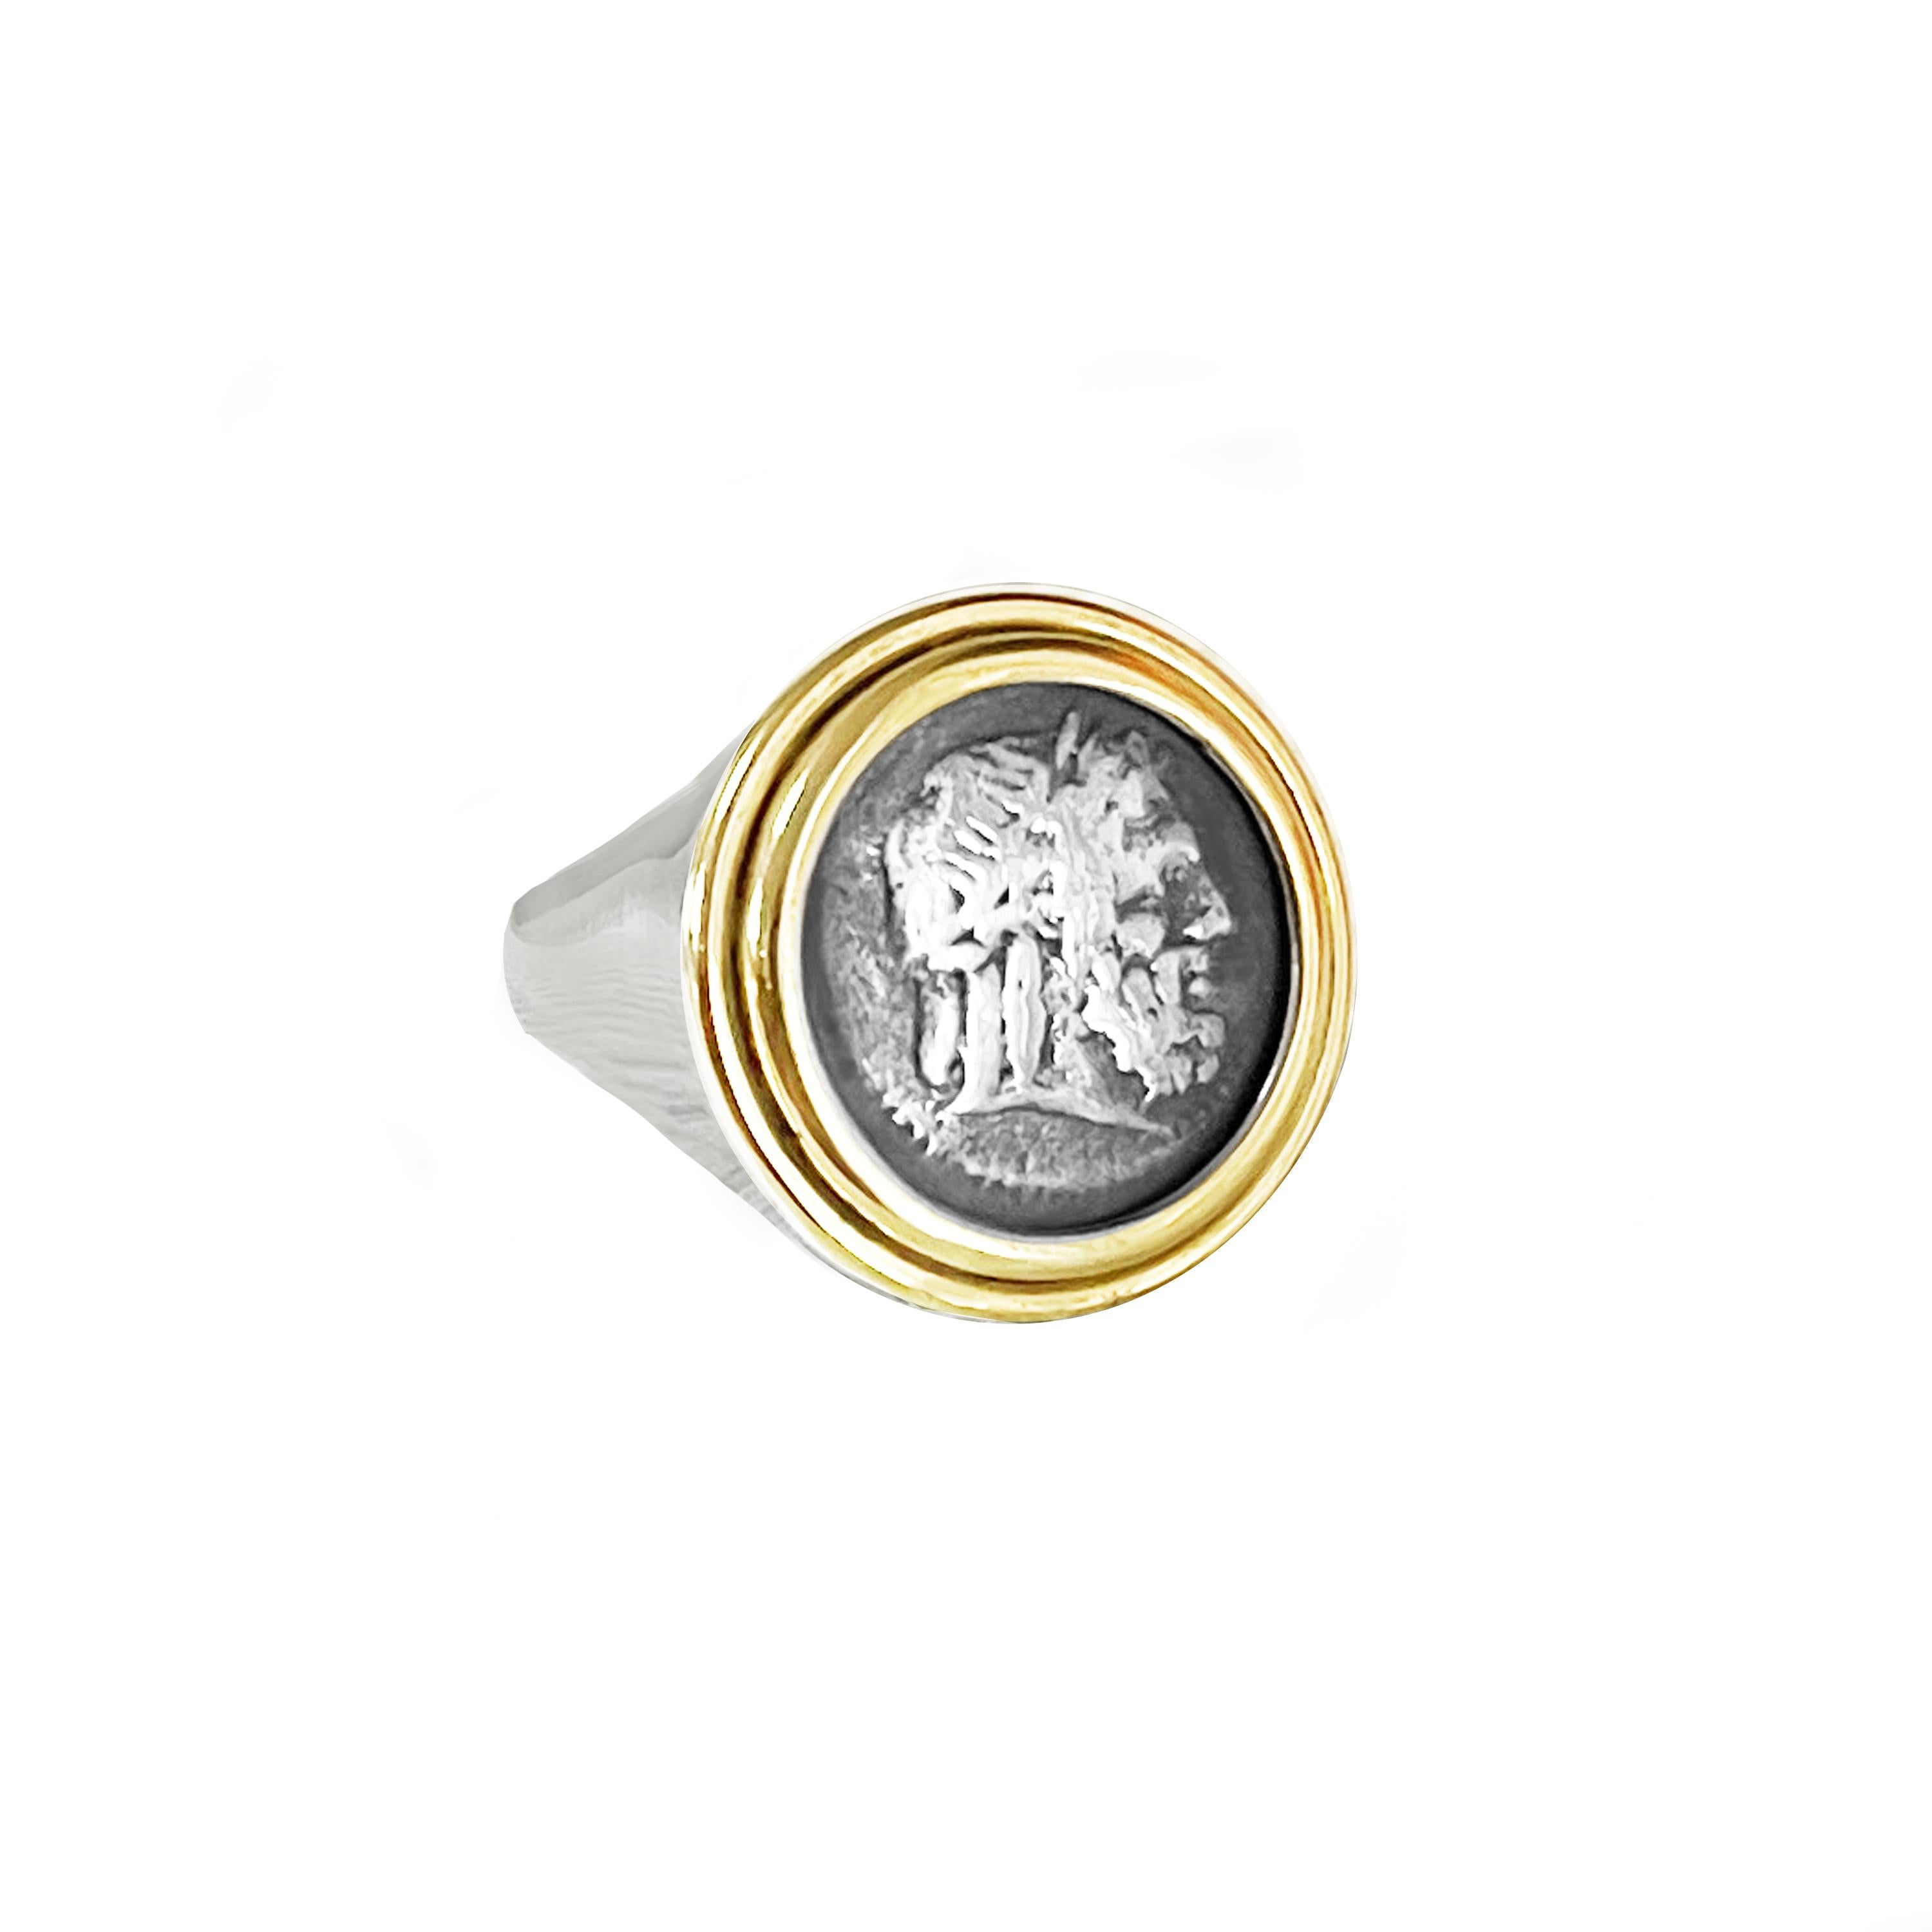 Classical Roman Authentic Zeus Roman Coin 3rd century BC Sterling Silver and 18 Kr Gold Ring For Sale